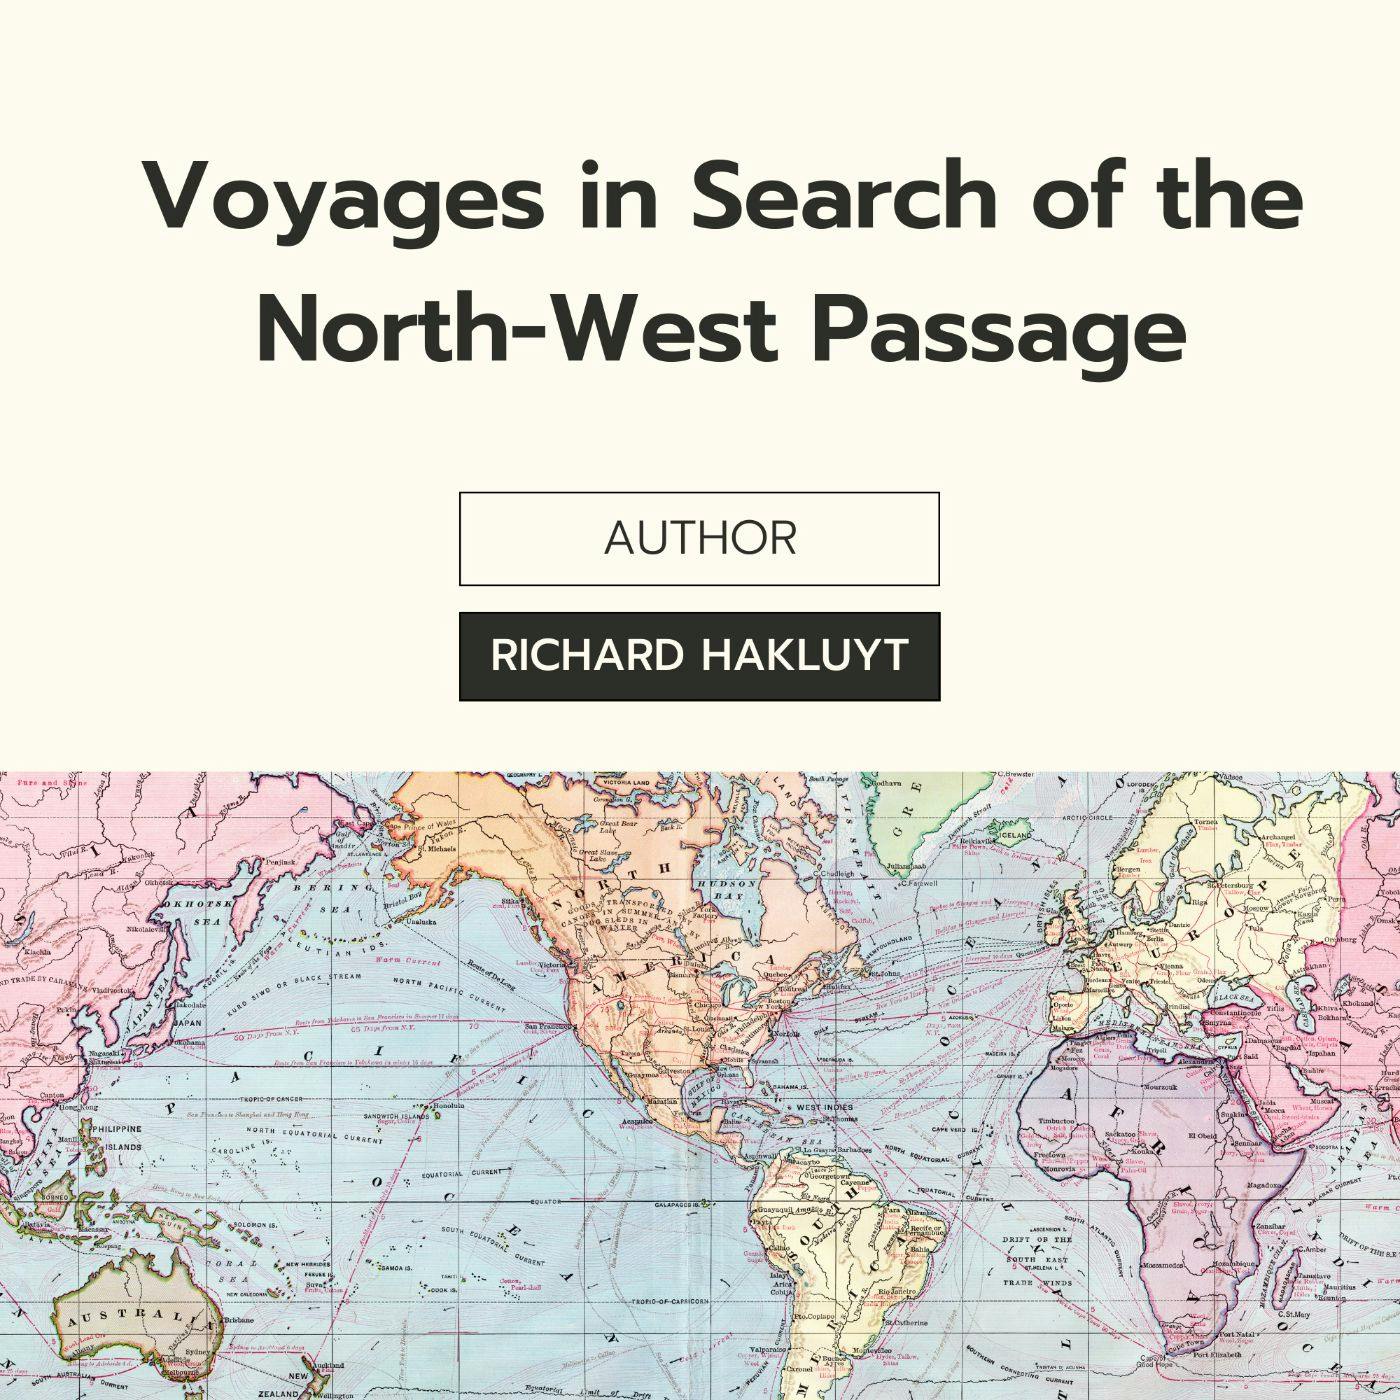 featured image - Voyages in Search of the North-West Passage by Richard Hakluyt - Table of Links